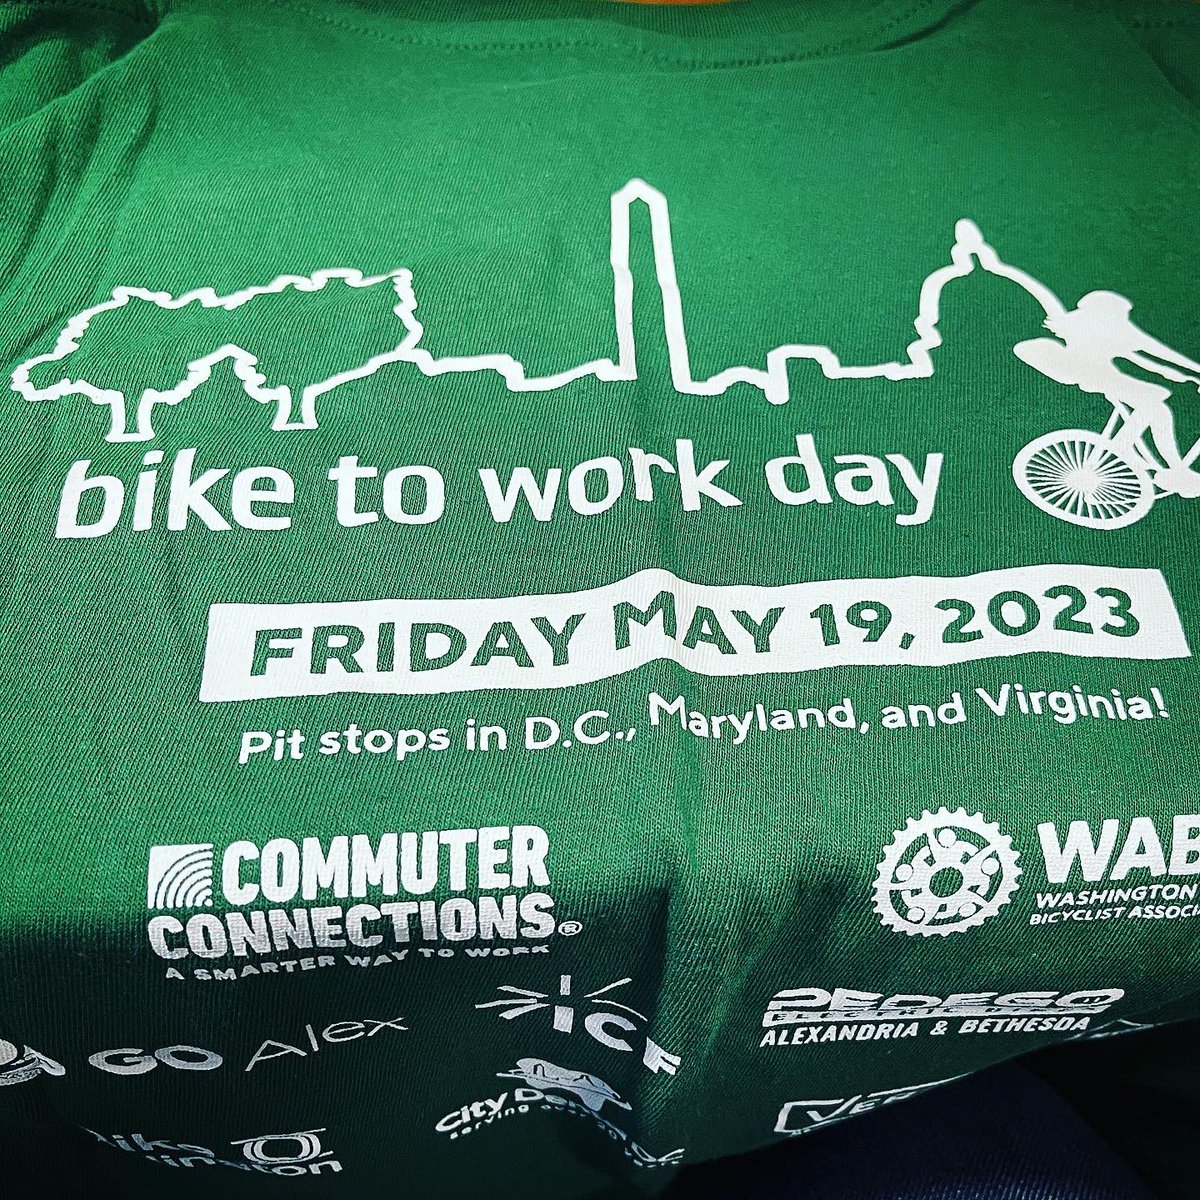 #BikeToWorkDay was a beautiful way to end the week!! Thank you #WashingtonAreaBicyclistAssociation for making this a thing!! #CapitalBikeshare was also quite CLUTCH!! #WashingtonDC #NationalMall #GreatWeather #WharfDC